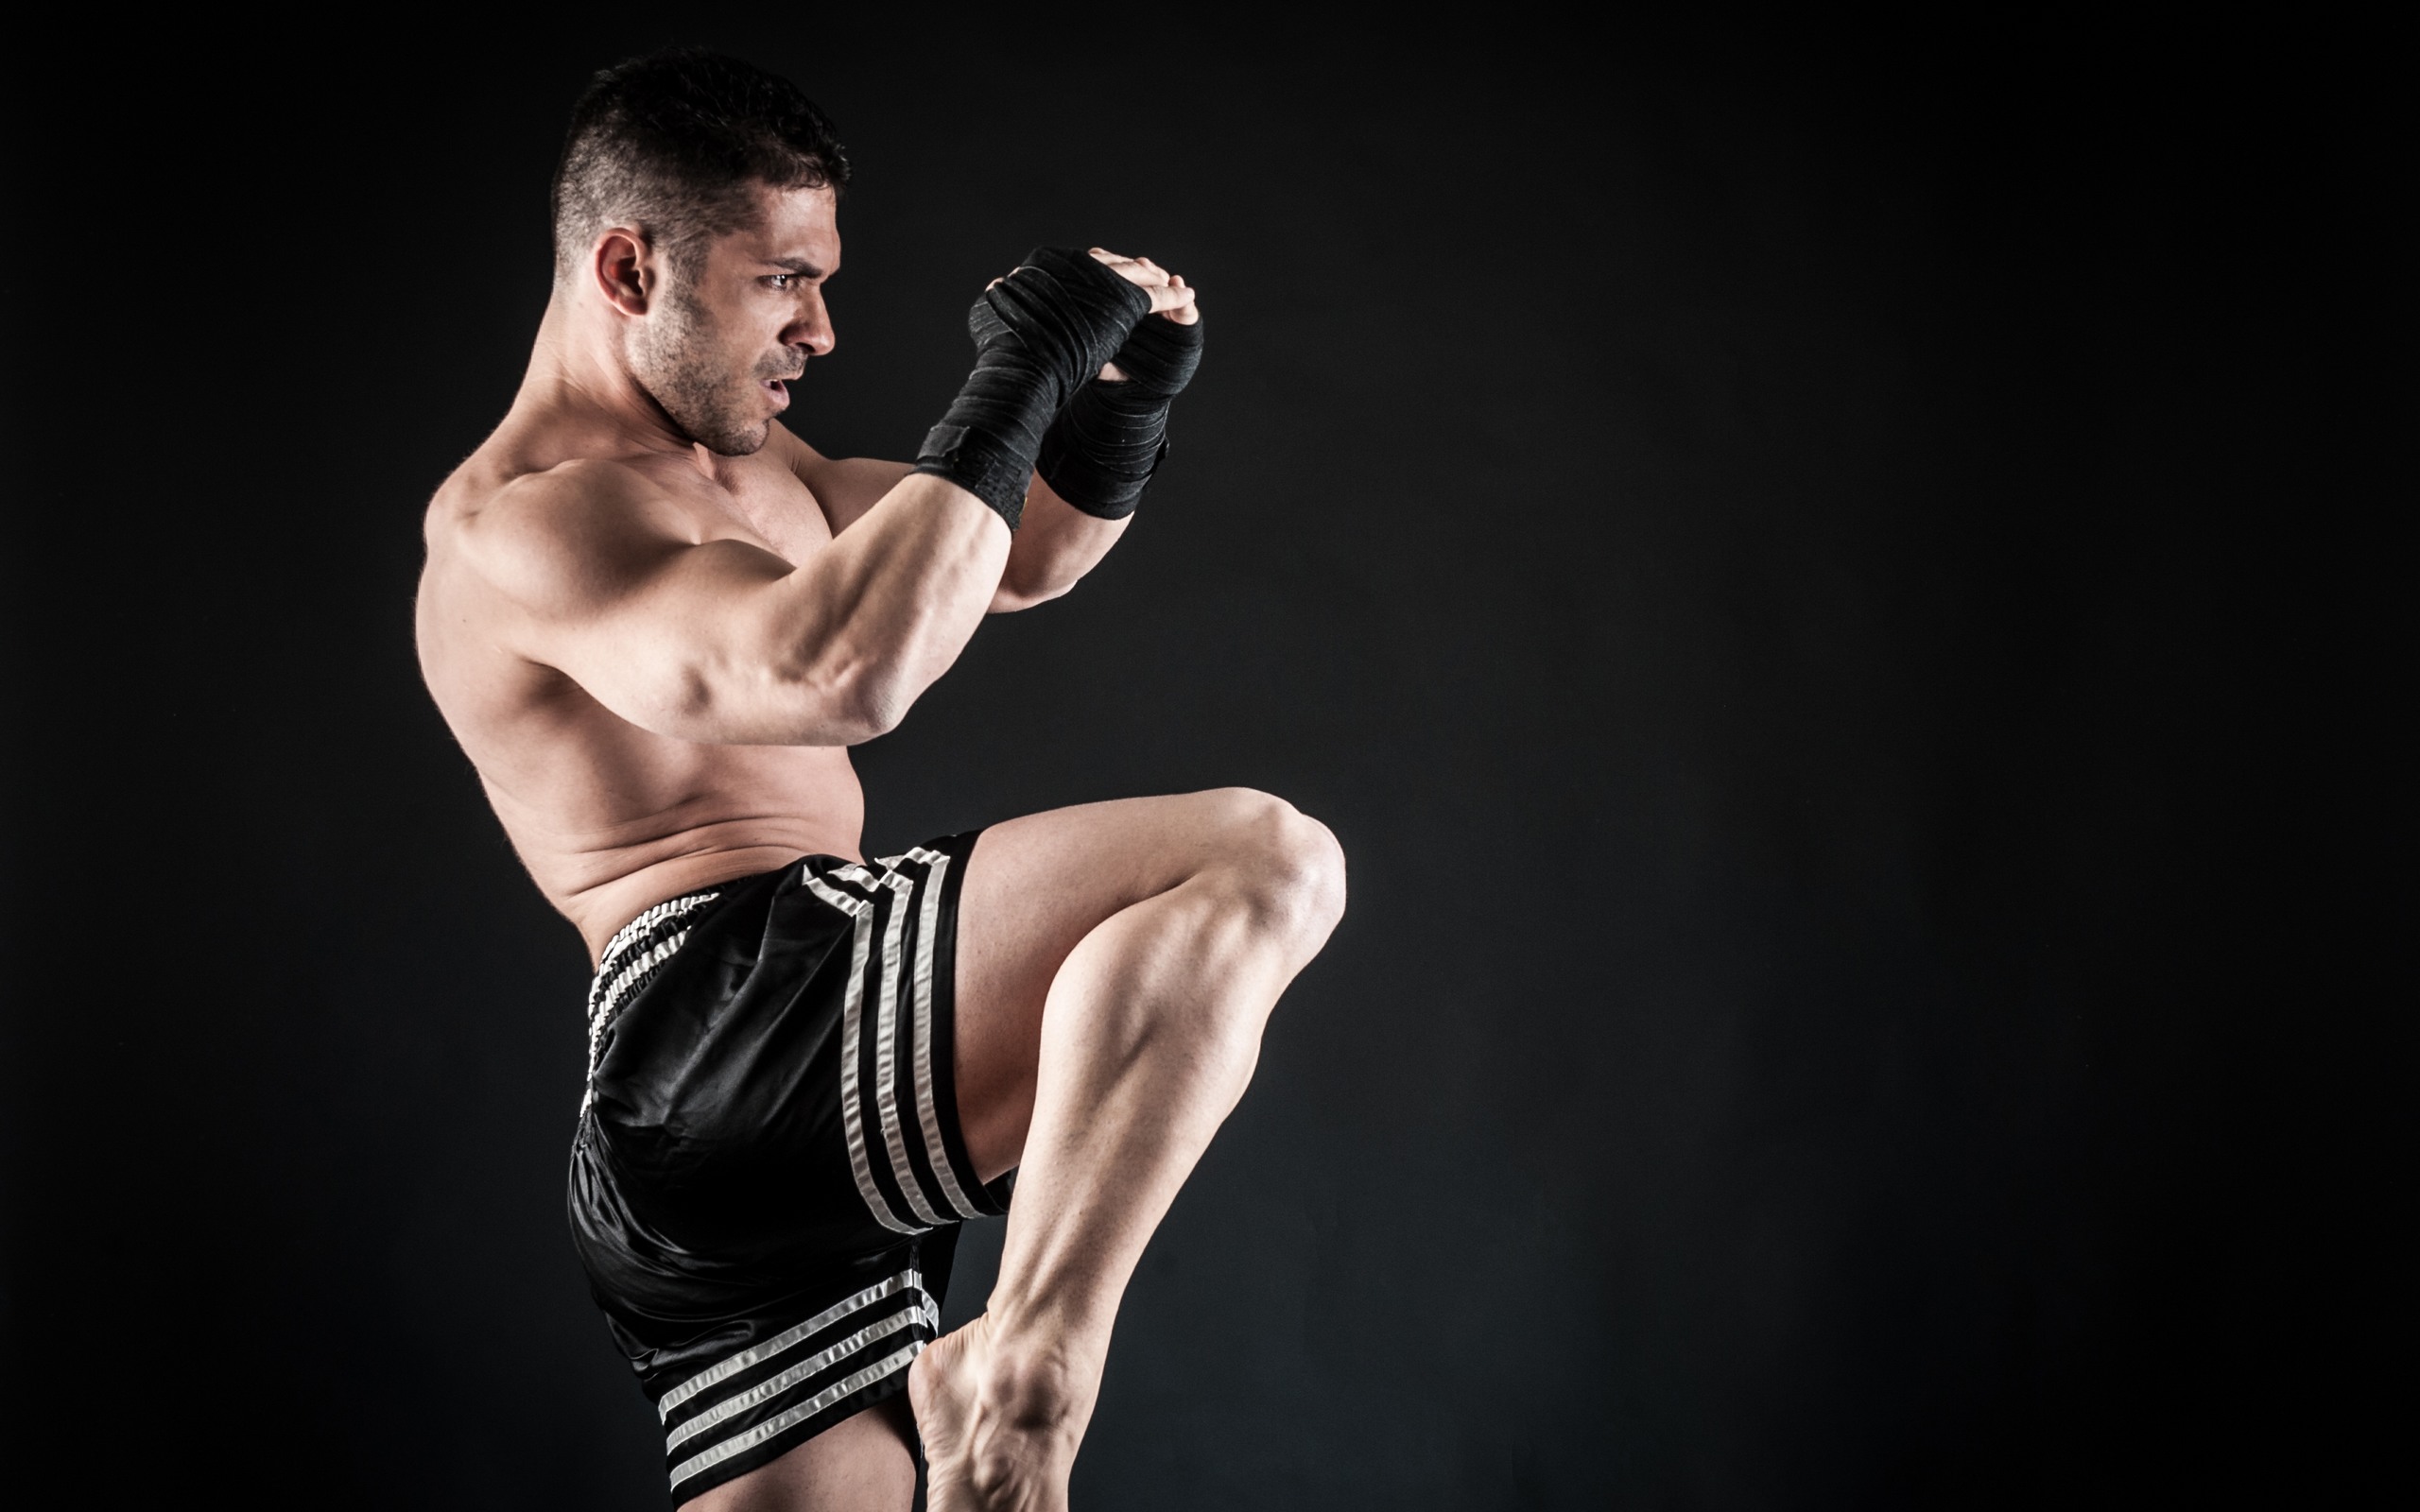 How is kickboxing different from other martial arts?